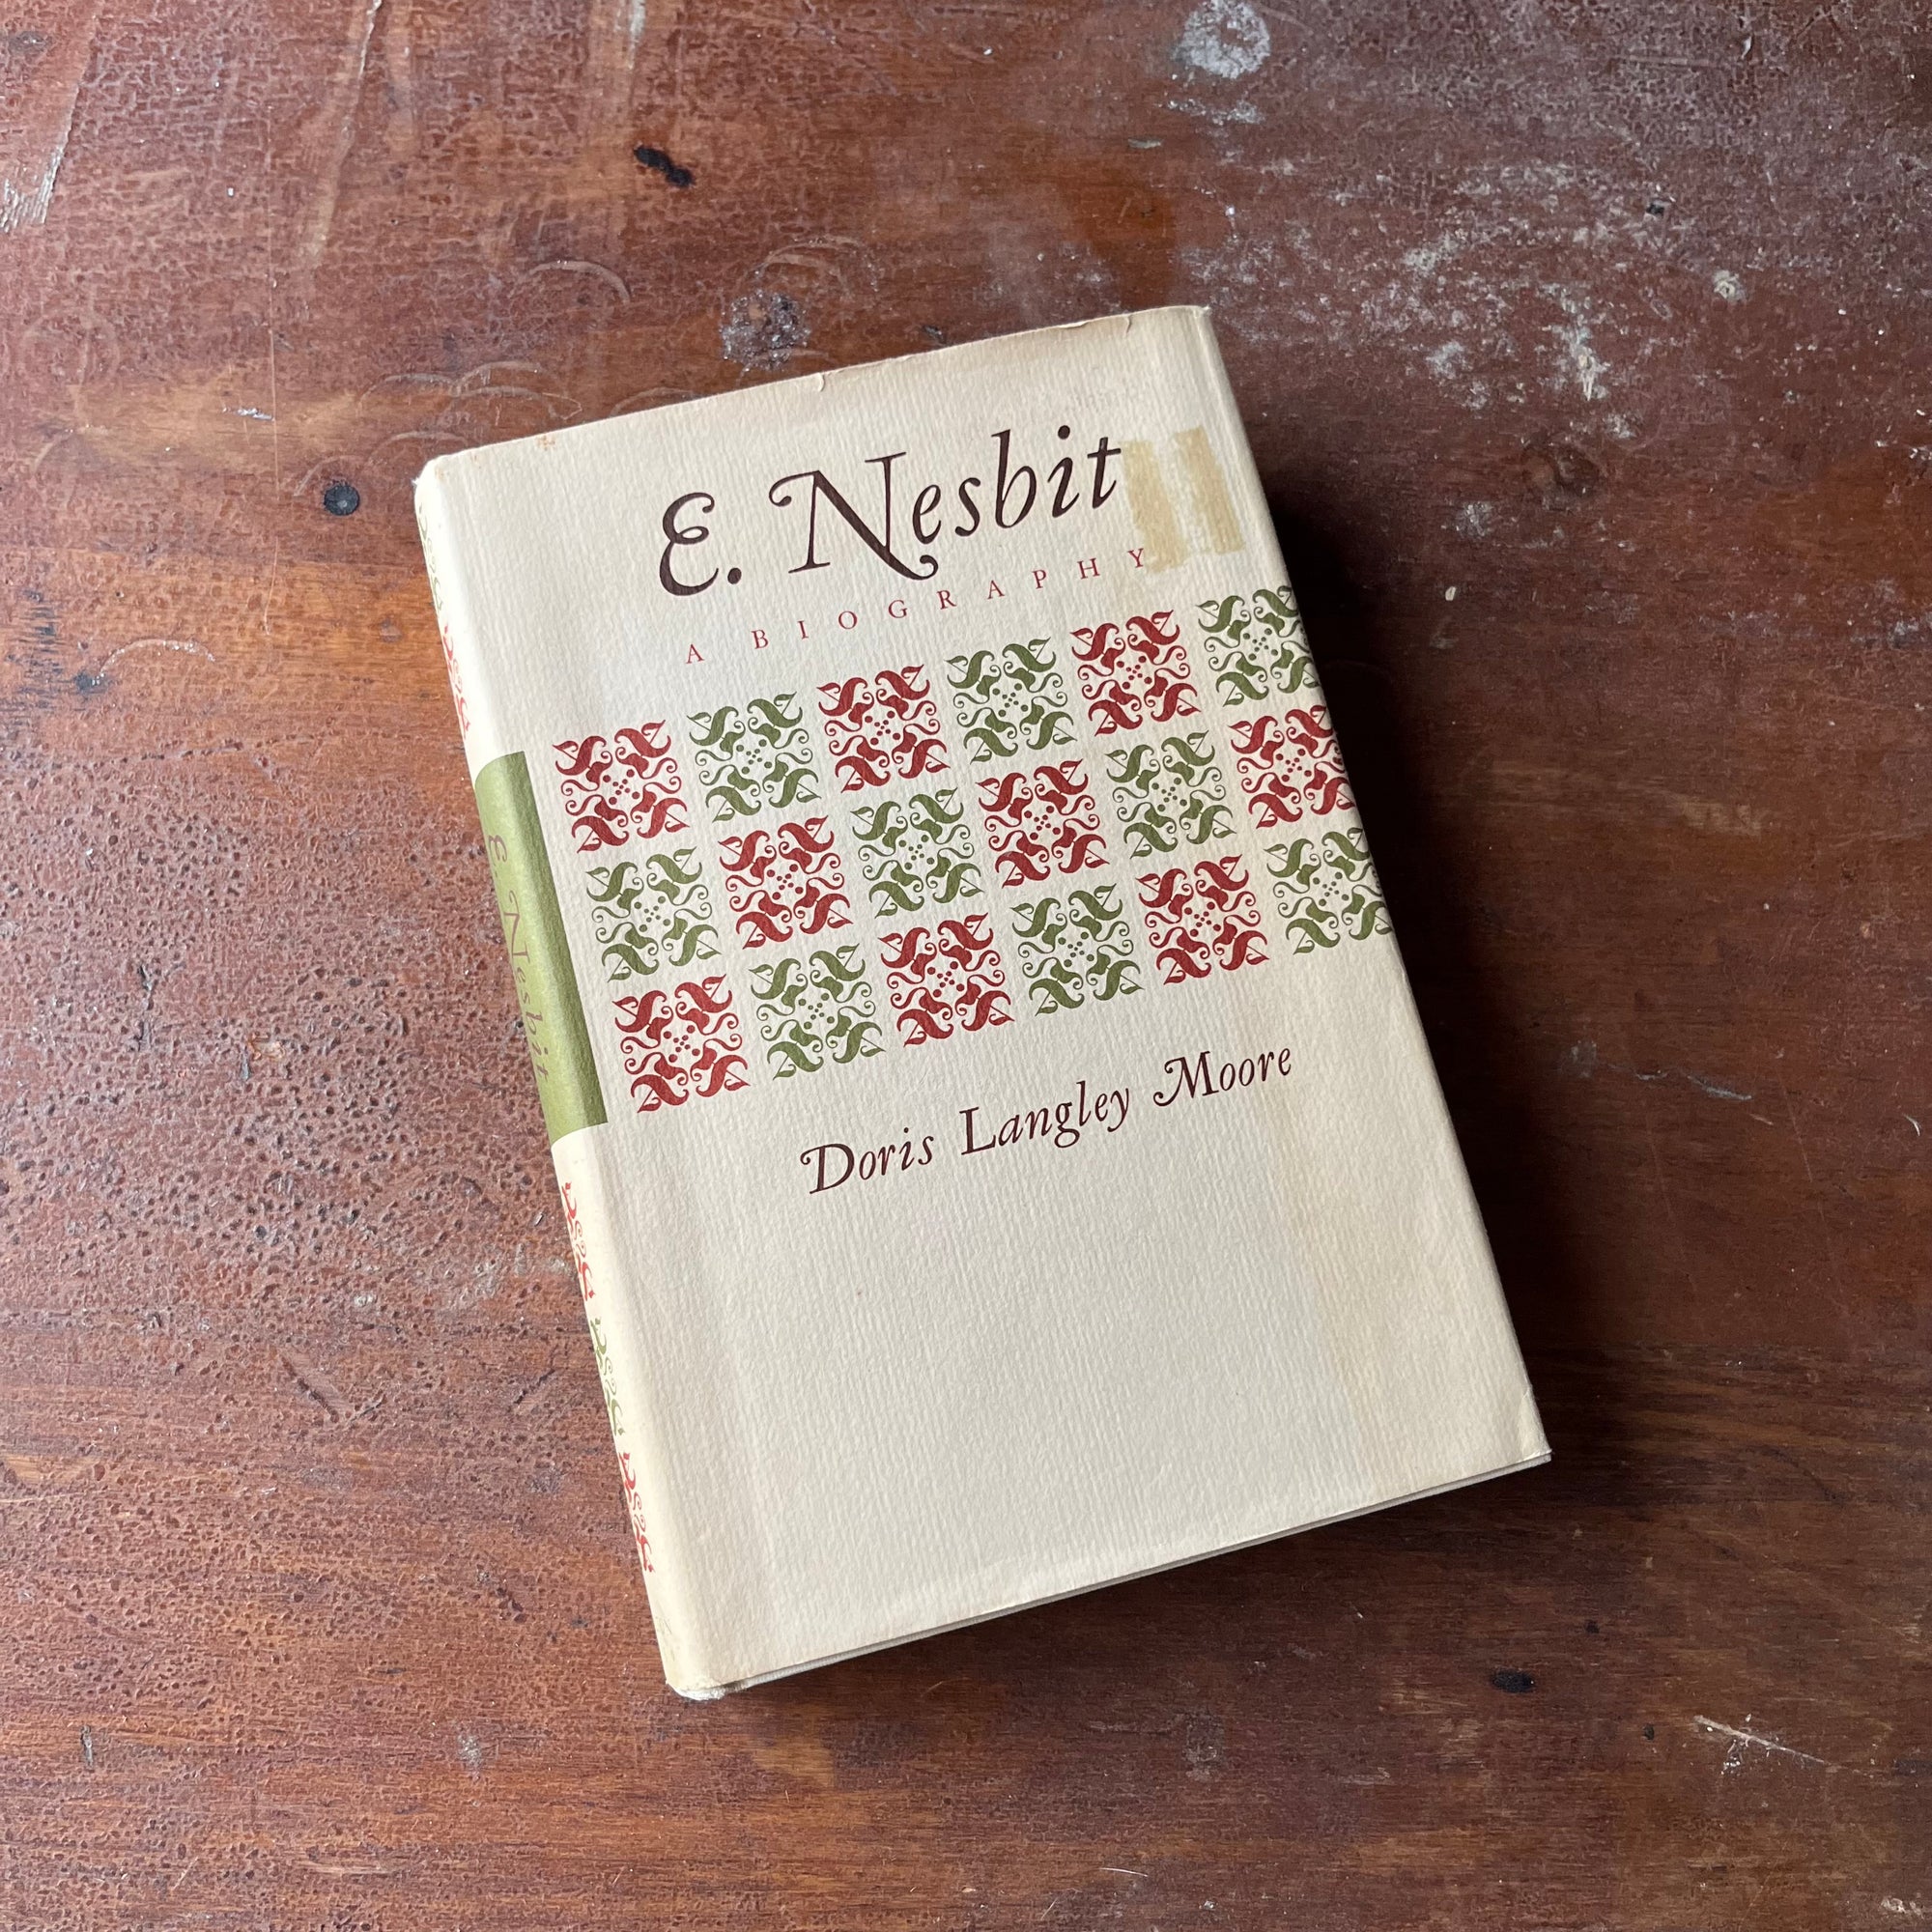 E. Nesbit A Biography by Doris Langley Moore-first edition-vintage children's author biography - view of the colorful dust jacket's front cover - red & green design across the middle along with the title of the book & author listed